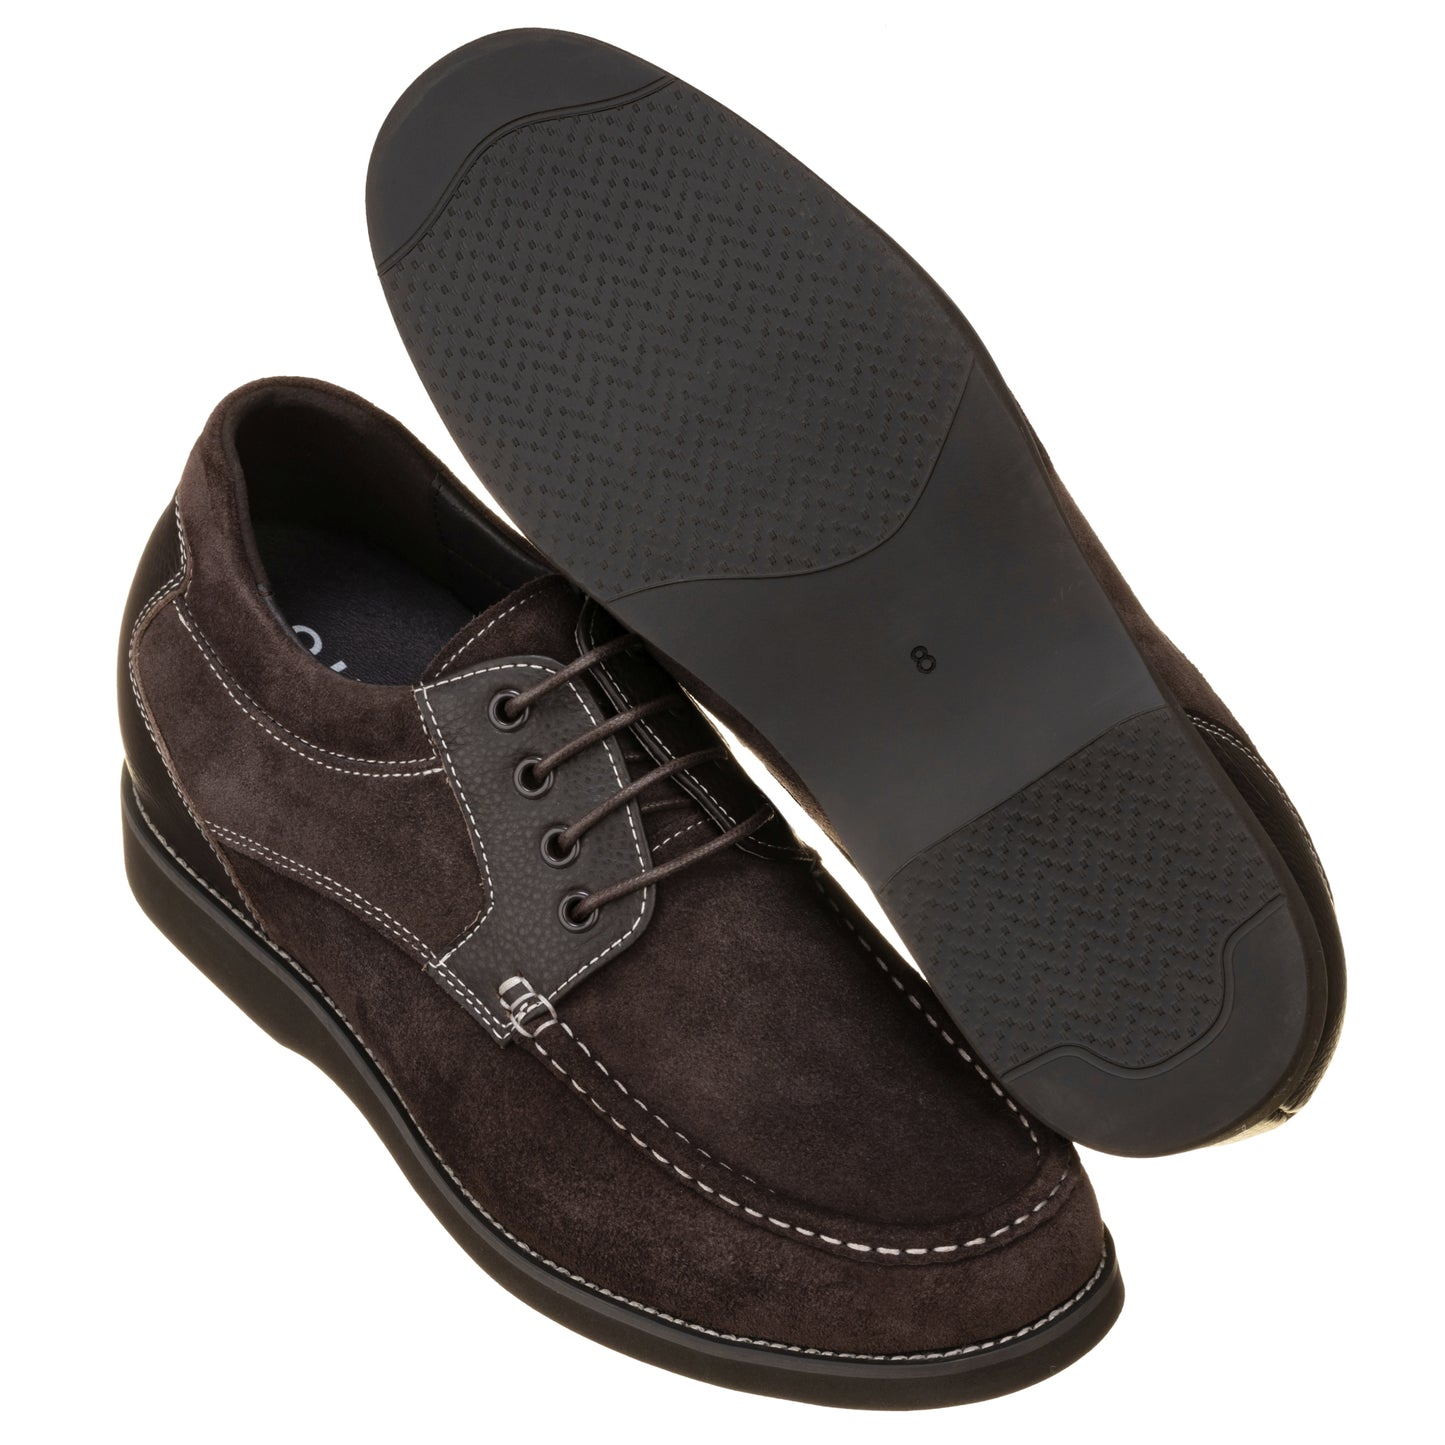 Elevator shoes height increase CALTO - YH9539 - 3.0 Inches (Dark Brown) - Casual Leather Shoes